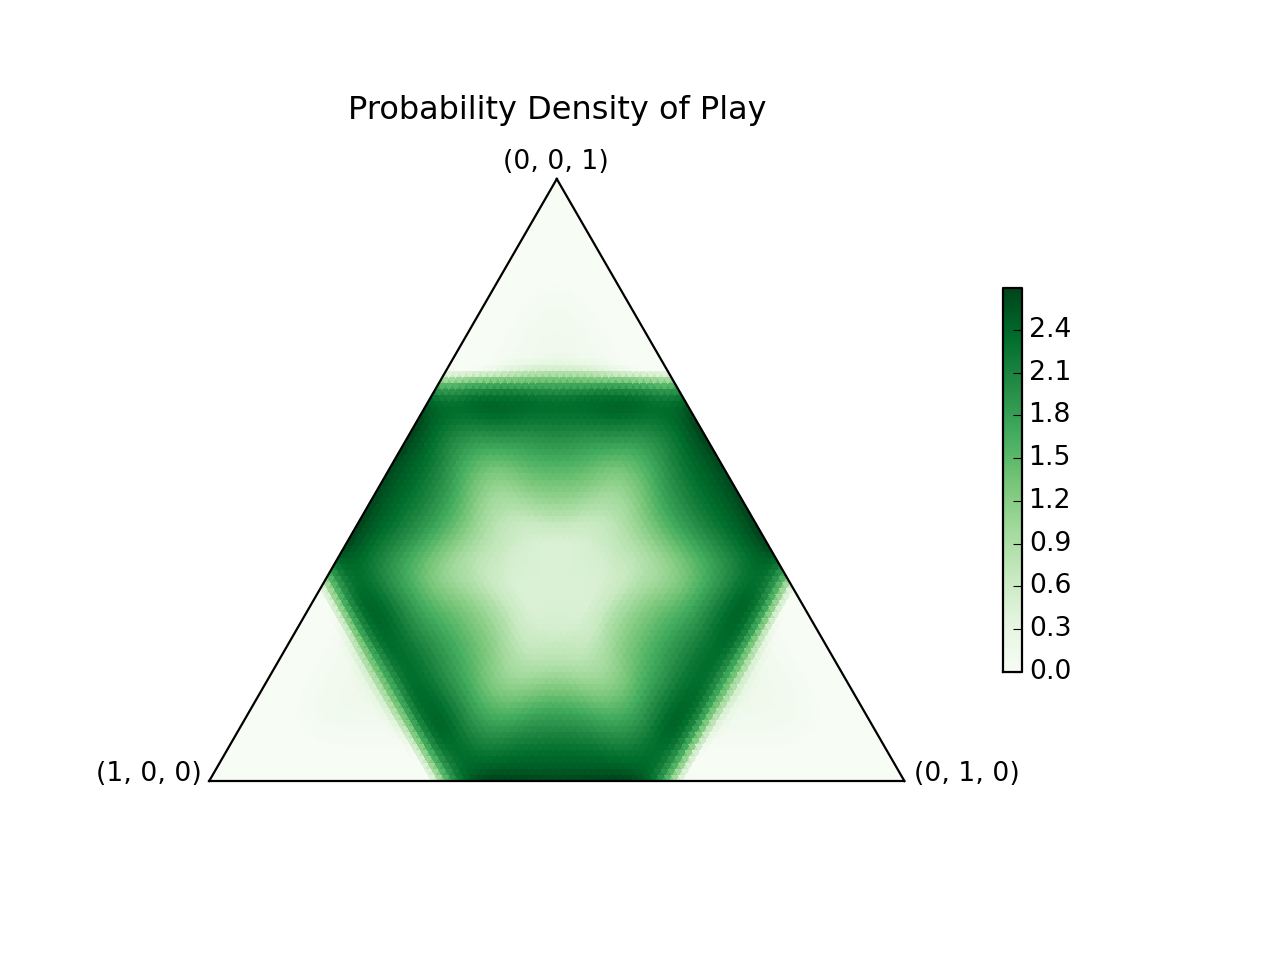 Beautiful probability density heat map on an equilateral triangle between the points (0, 0, 1), (0, 1, 0), and (1, 0, 0). The inner hexagram's edges are high-probability, and the outer subtriangles have no probability.